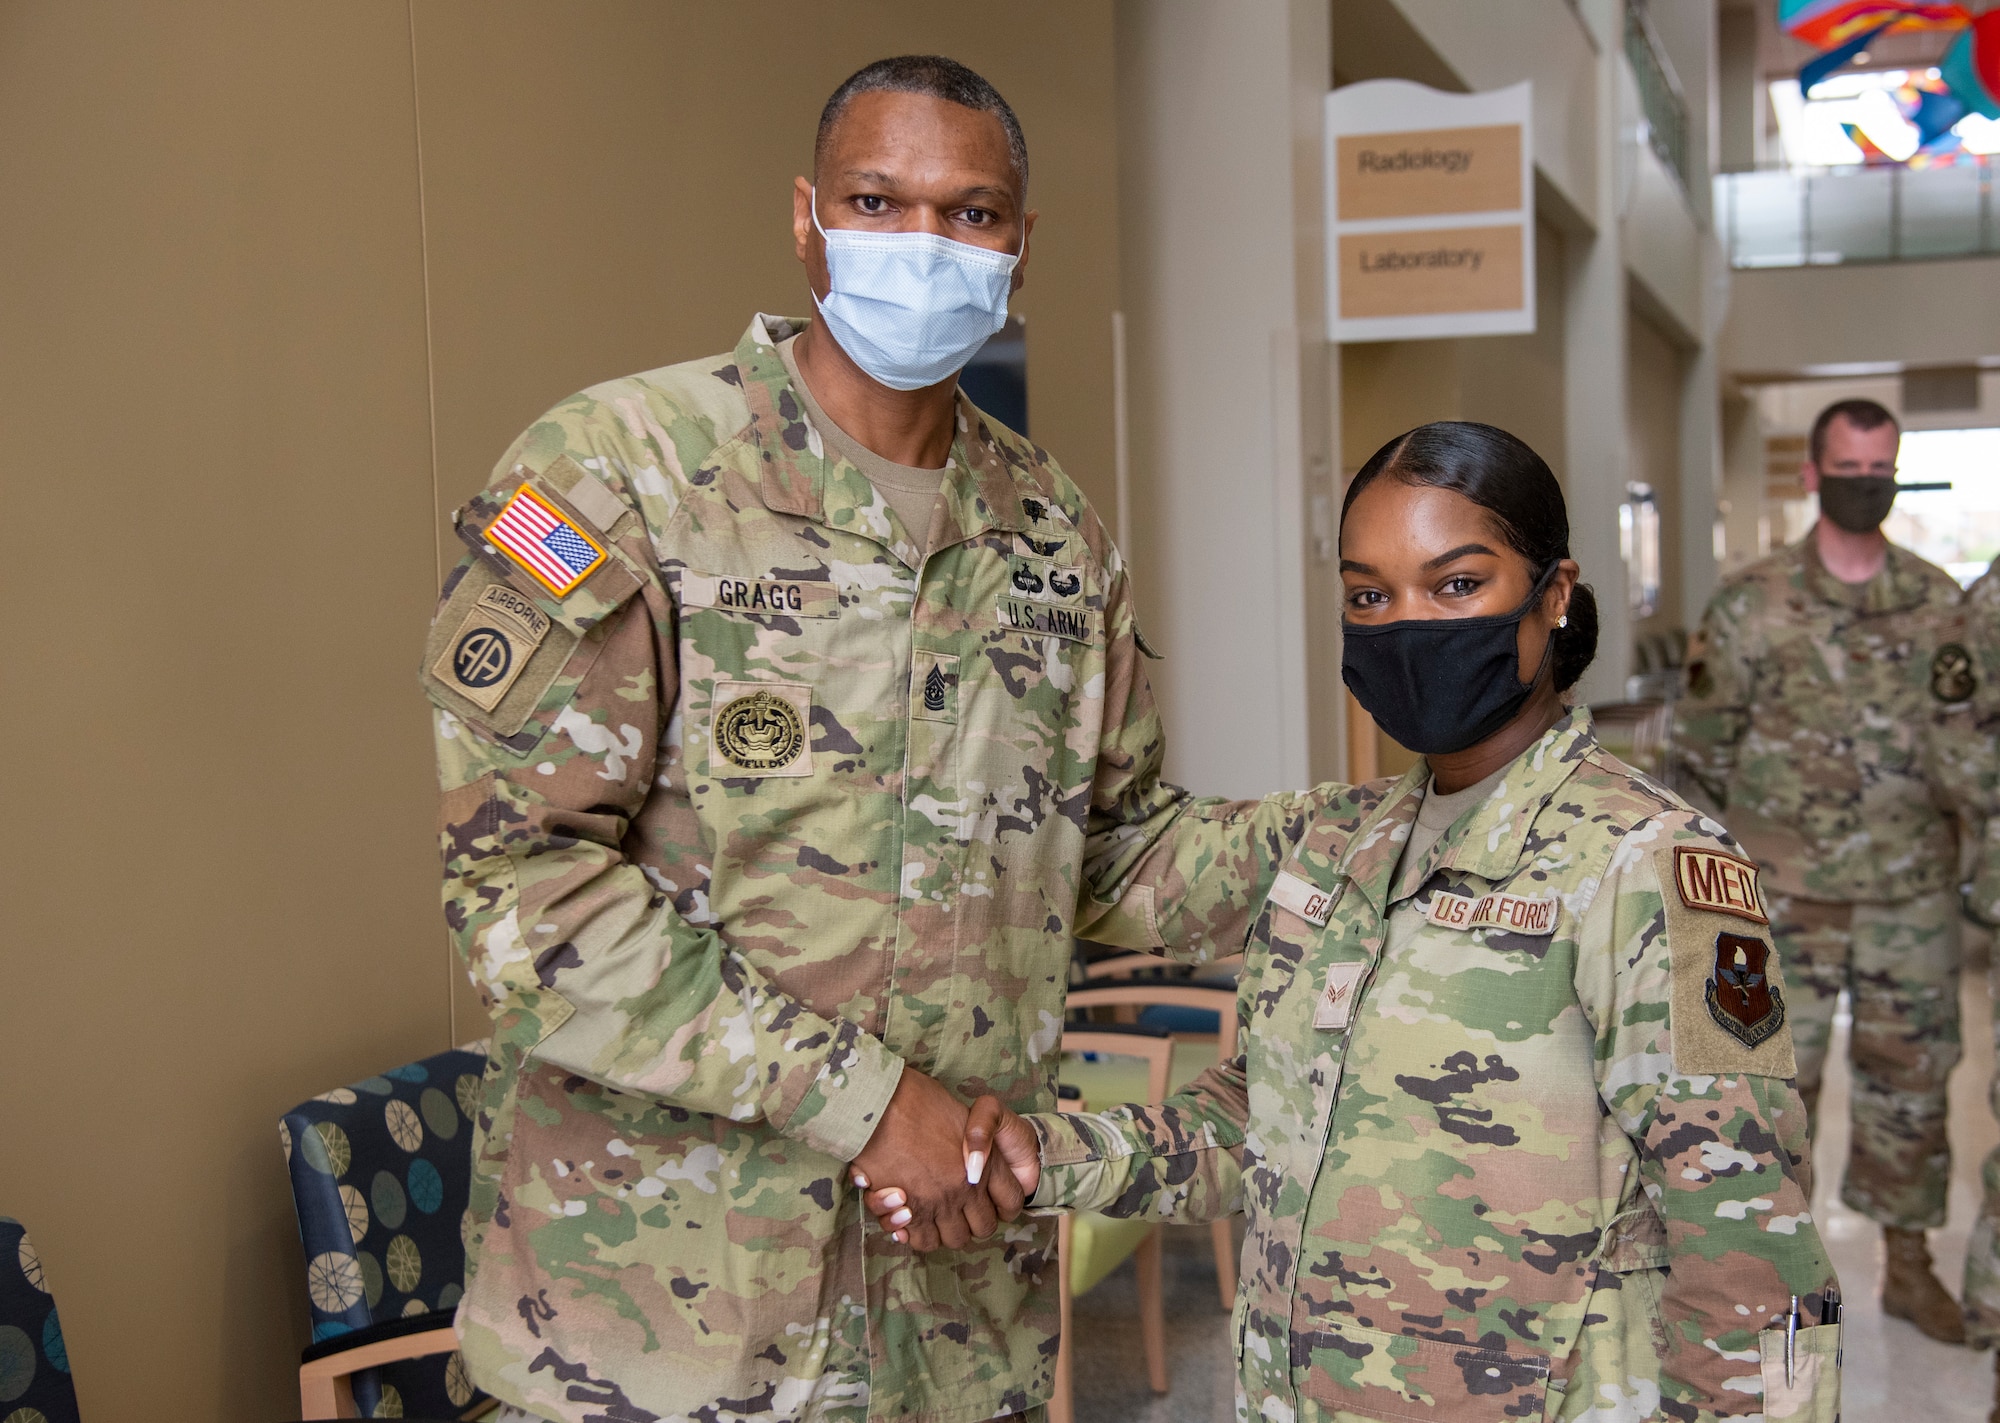 Command Sgt. Maj. Michael Gragg, Defense Health Agency senior enlisted leader, poses for a photo after coining Senior Airman Briannah Grant, 49th Medical Group operational medicine medical technician, June 30, 2021, on Holloman Air Force Base, New Mexico. Gragg visited the 49th MDG to discuss the current state of the DHA and to address any areas of concern. (U.S. Air Force photo by Airman 1st Class Jessica Sanchez)